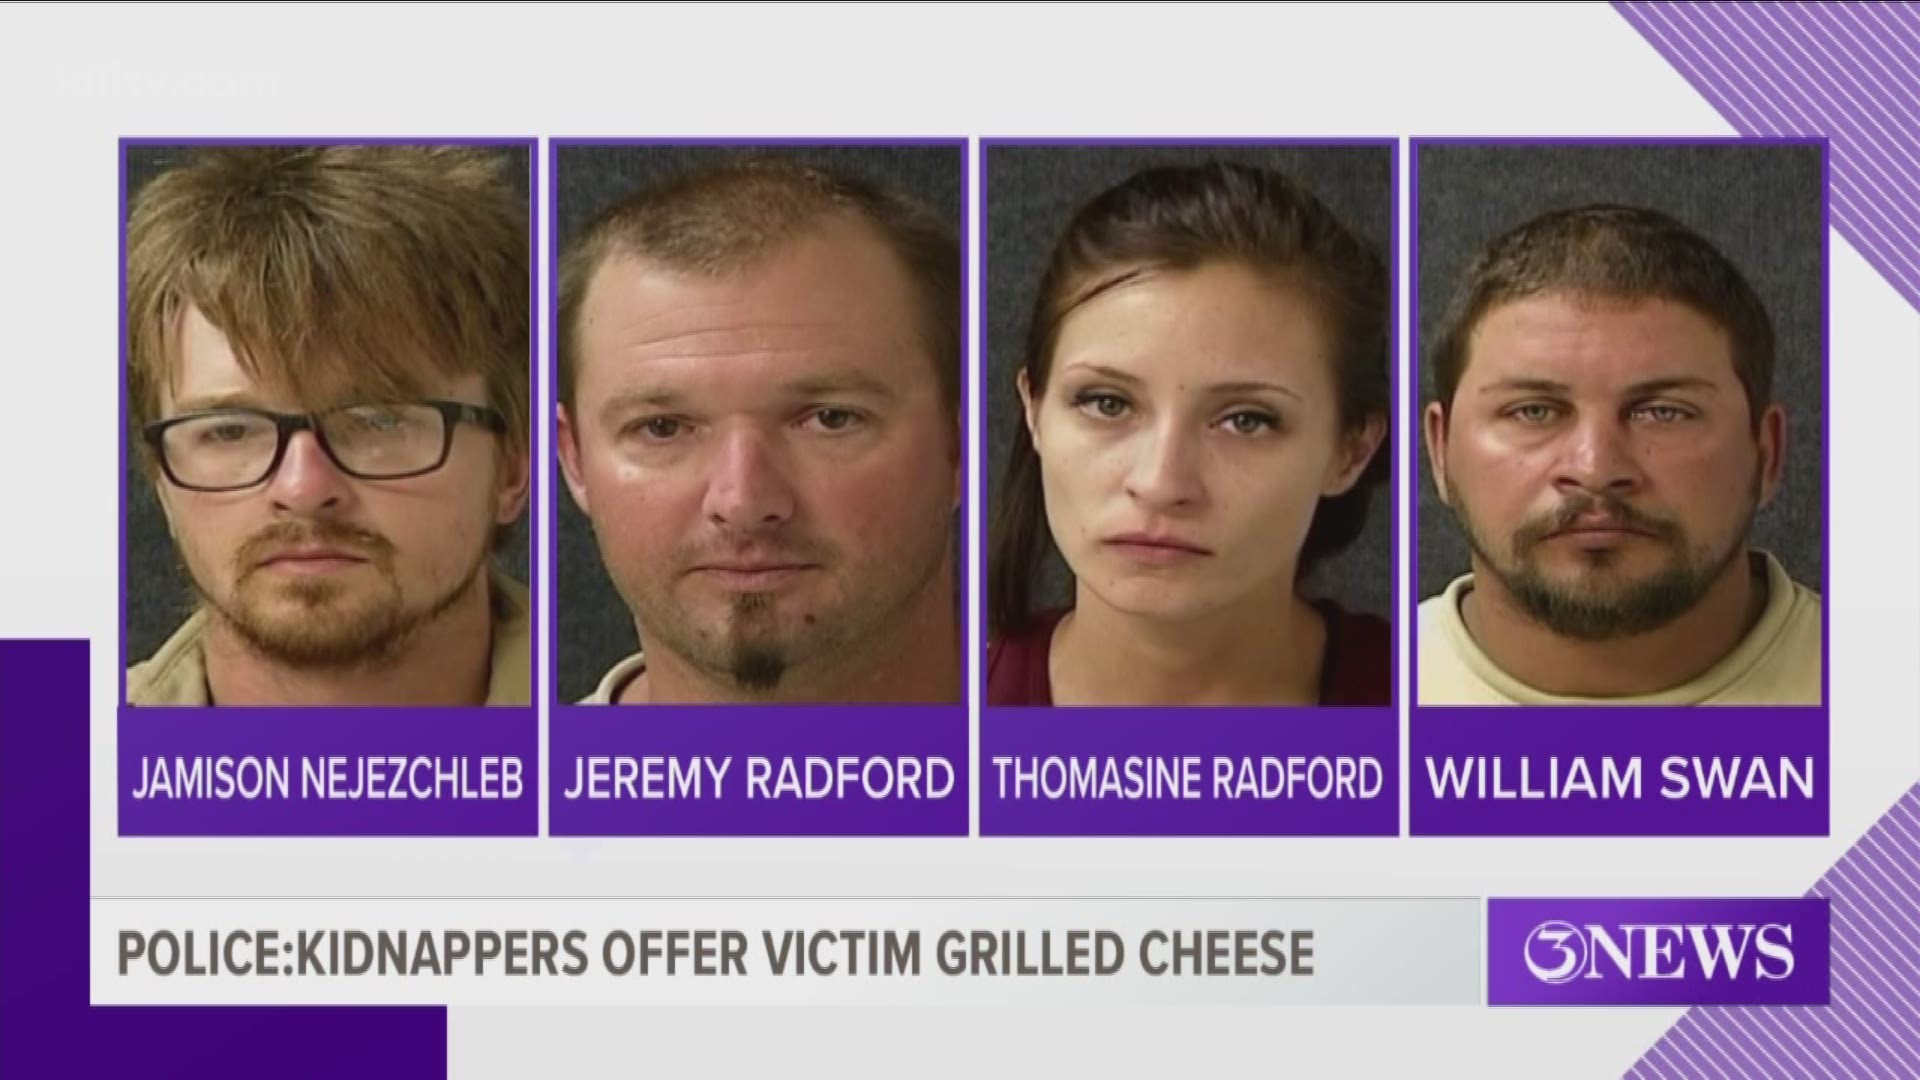 An Aransas Pass man was offered a grilled cheese sandwich for his troubles after being kidnapped by four coworkers Sunday and held at gunpoint for several hours, according to the Aransas Pass Police Department.